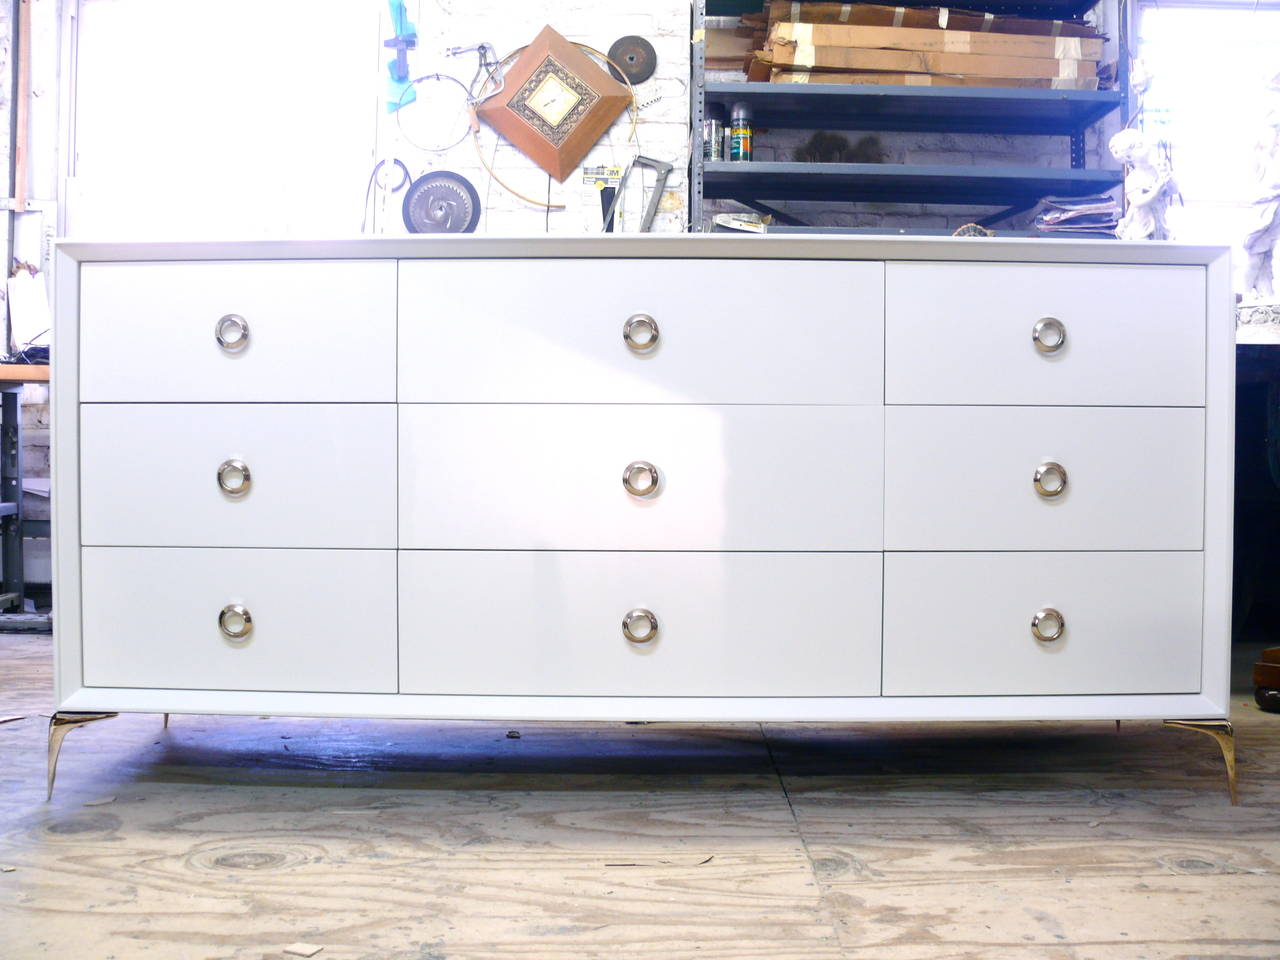 Stiletto nine-drawer dresser by Irwin Feld Design for CF Modern. Shown in BM white dove high gloss lacquer and polished solid brass hardware. This dresser can be customized to your perfect specifications. Shown lacquered, CF Modern offers many other